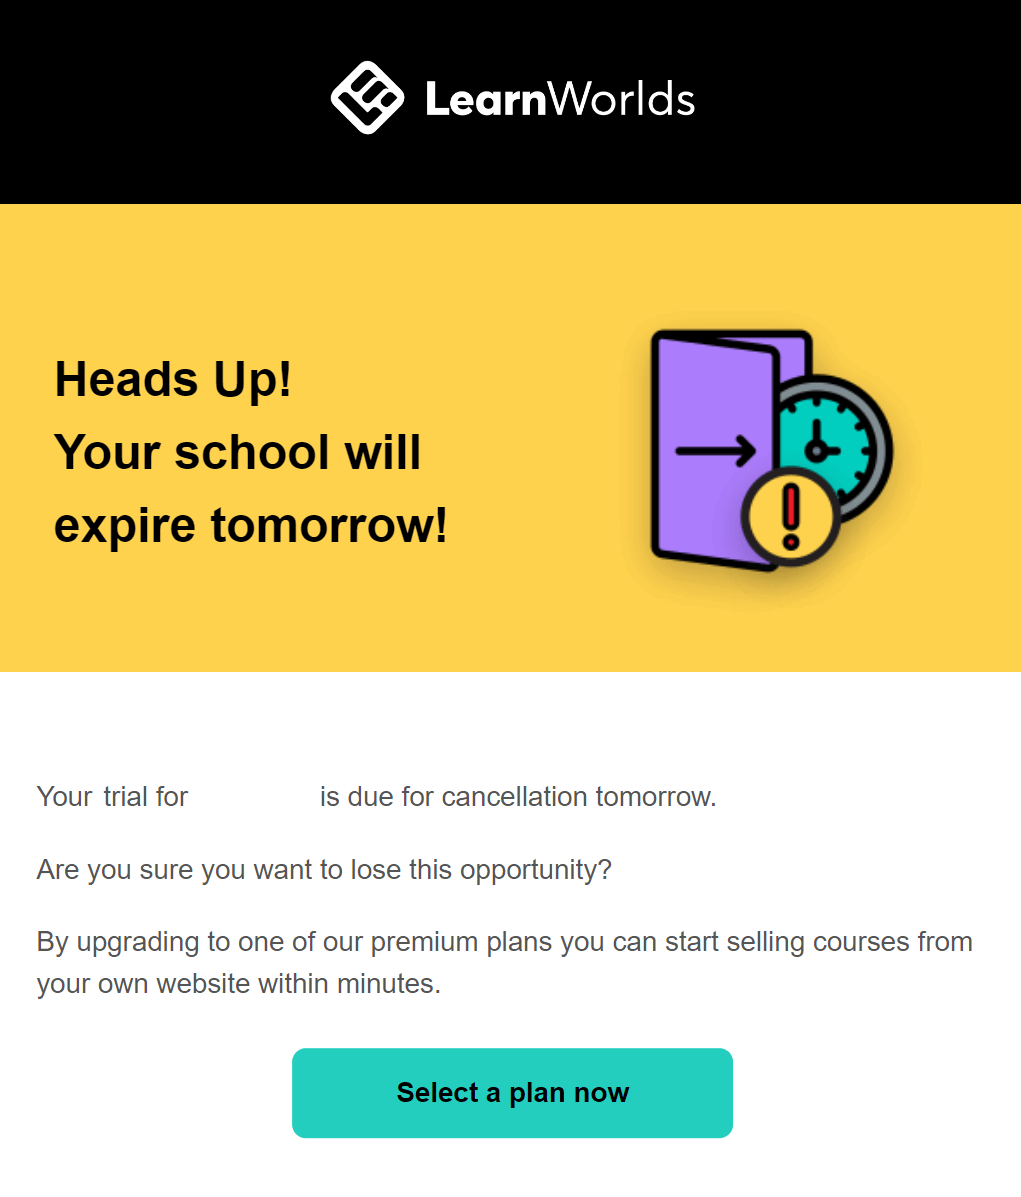 learnworlds free trial expiration example